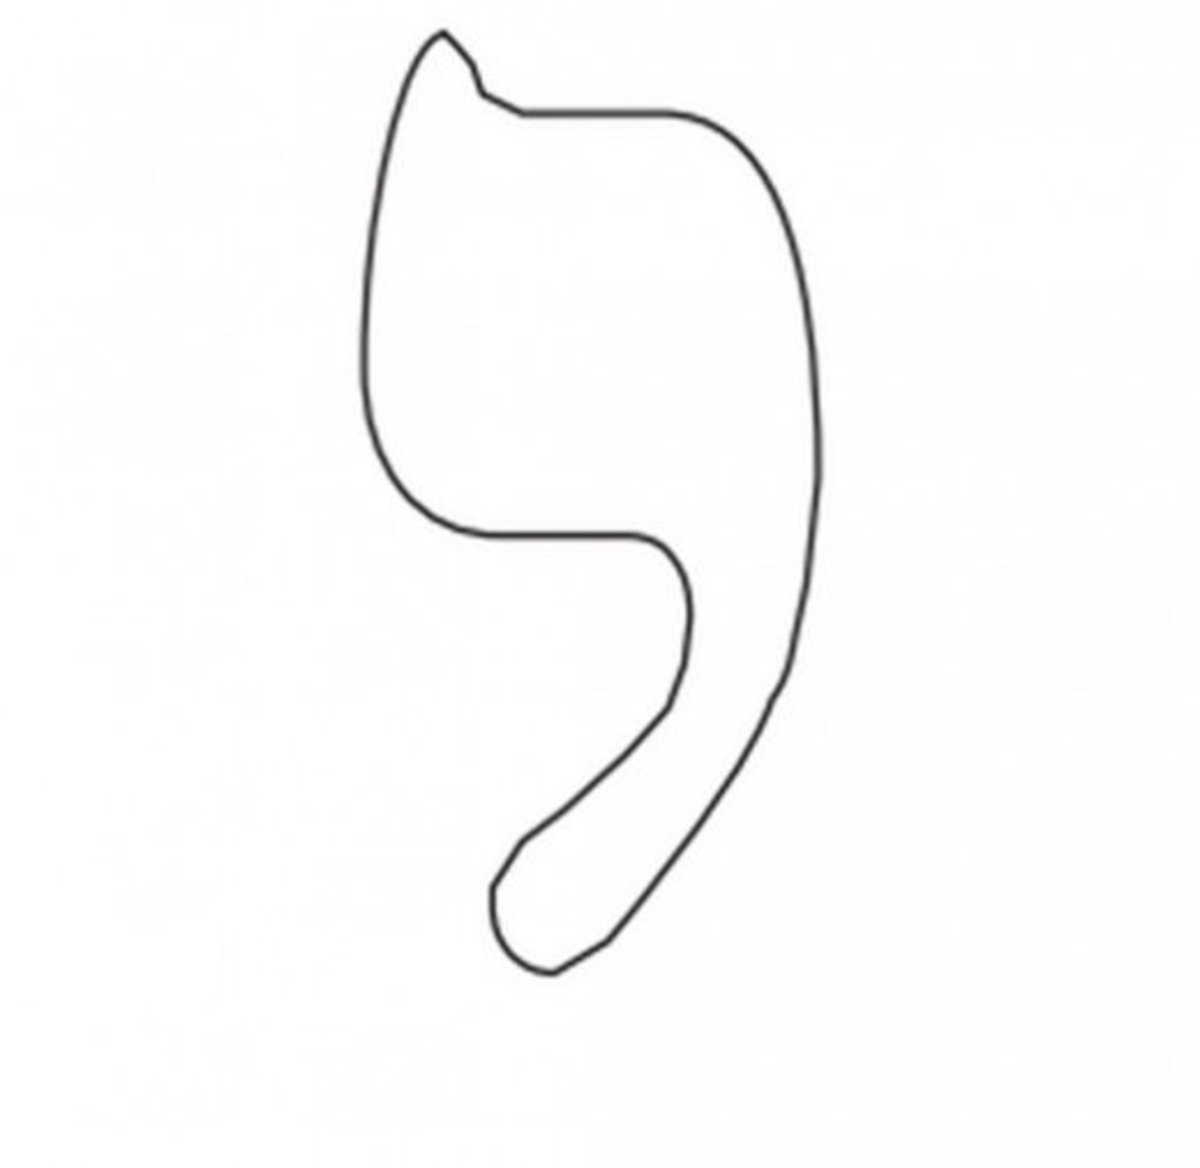 Hebrew Letter Yod Coloring Page - דף צביעה אוֹת יוד